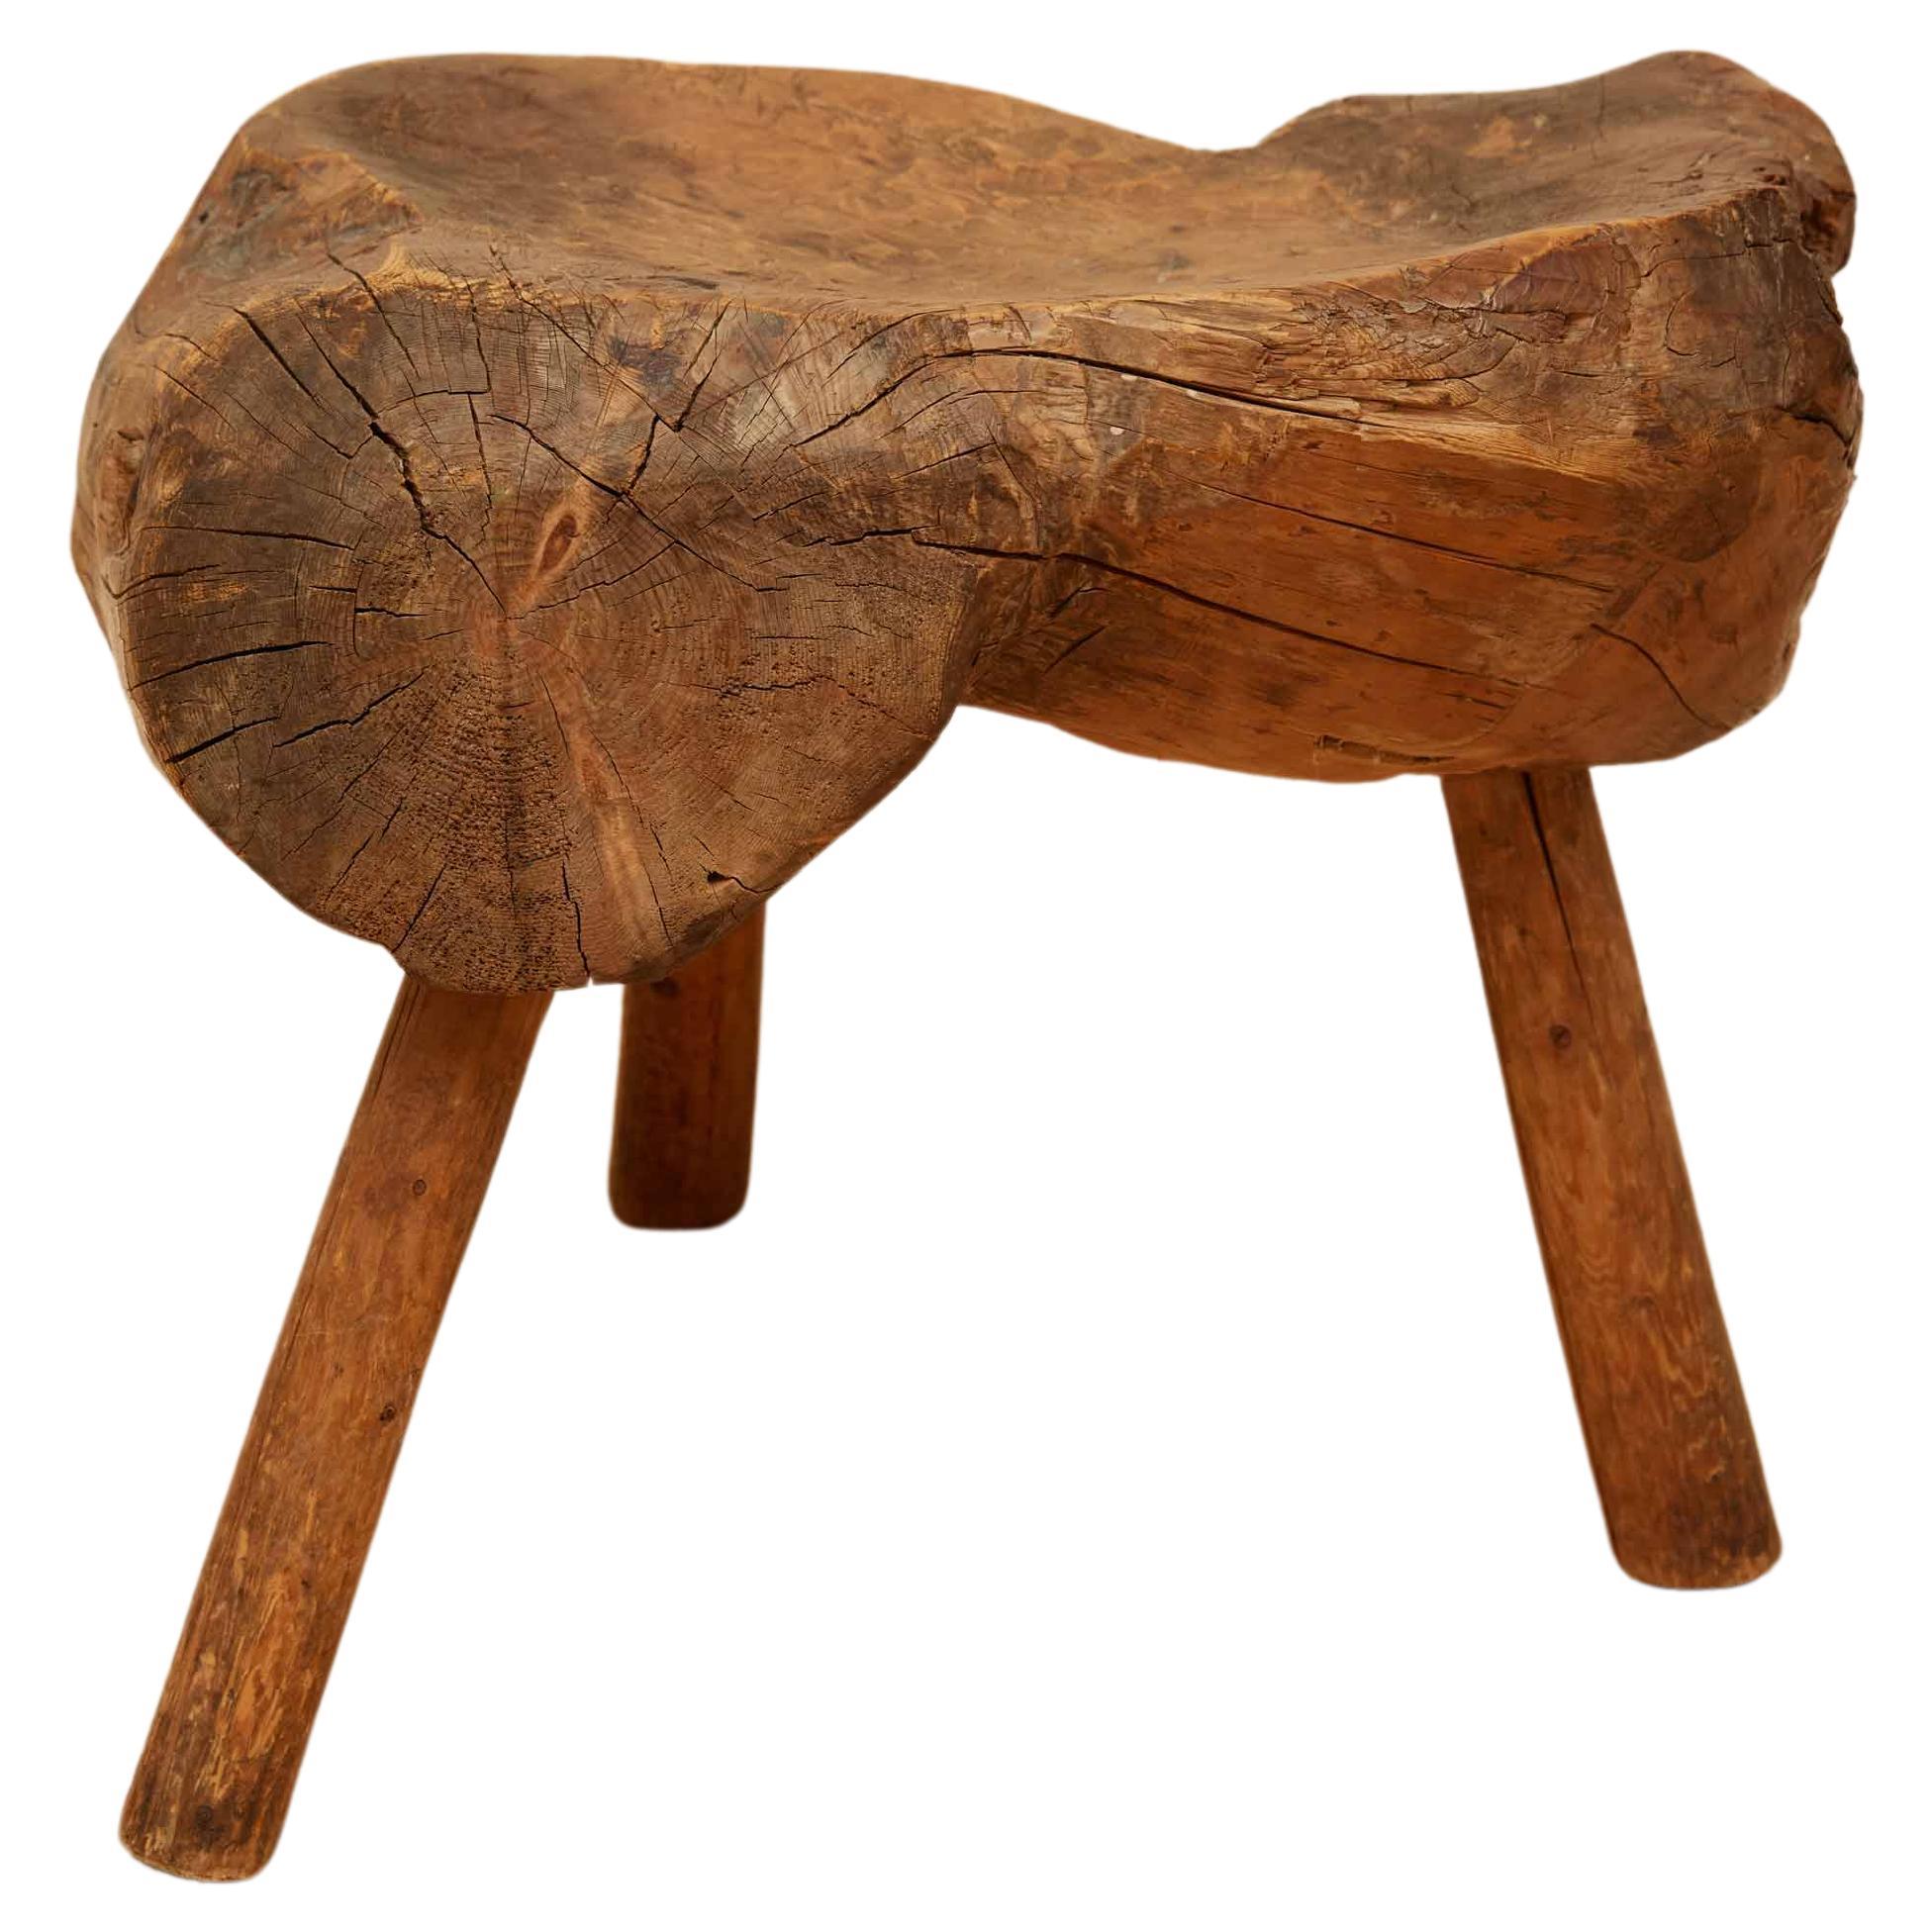 Wood Block Stool from Norway, 18th C For Sale